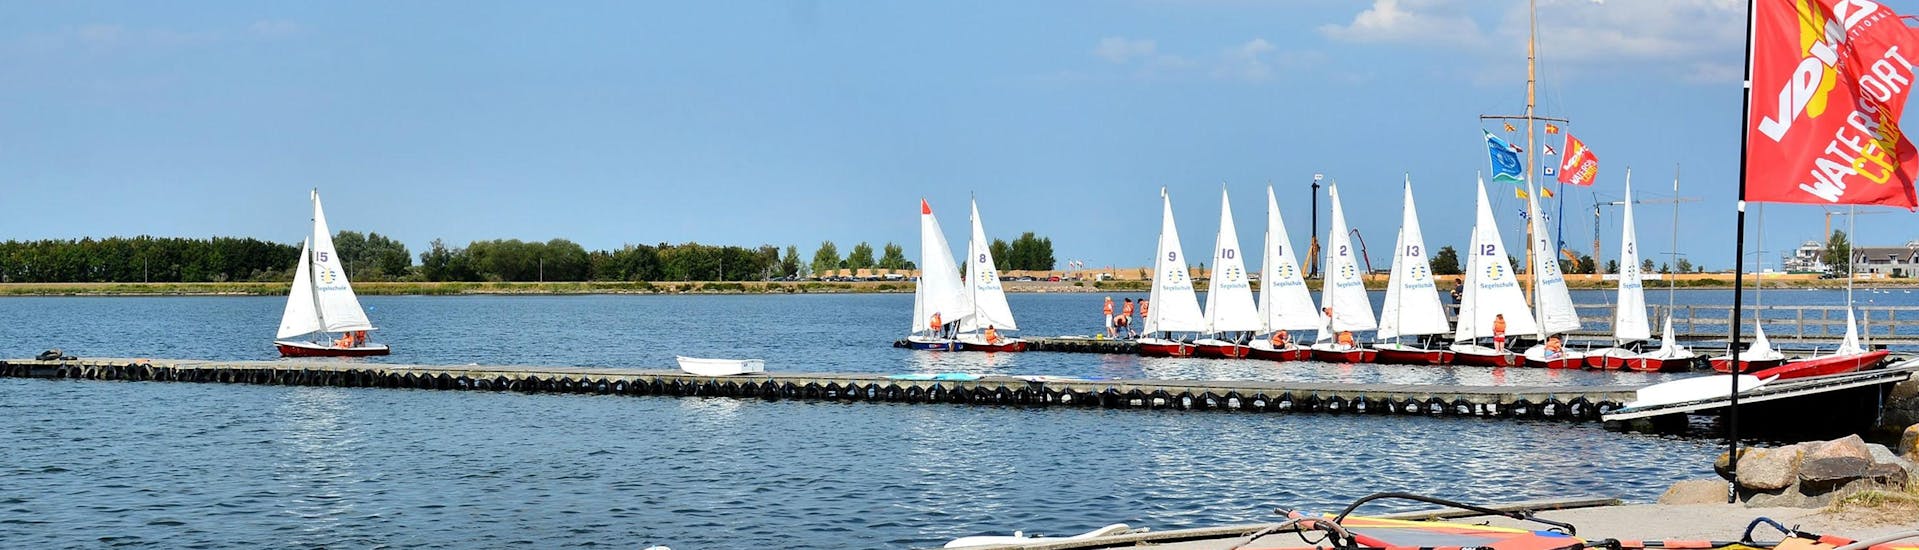 A view of the lake during Windsurfing Lessons "Trial Lesson" with Wassersportcenter Heiligenhafen.